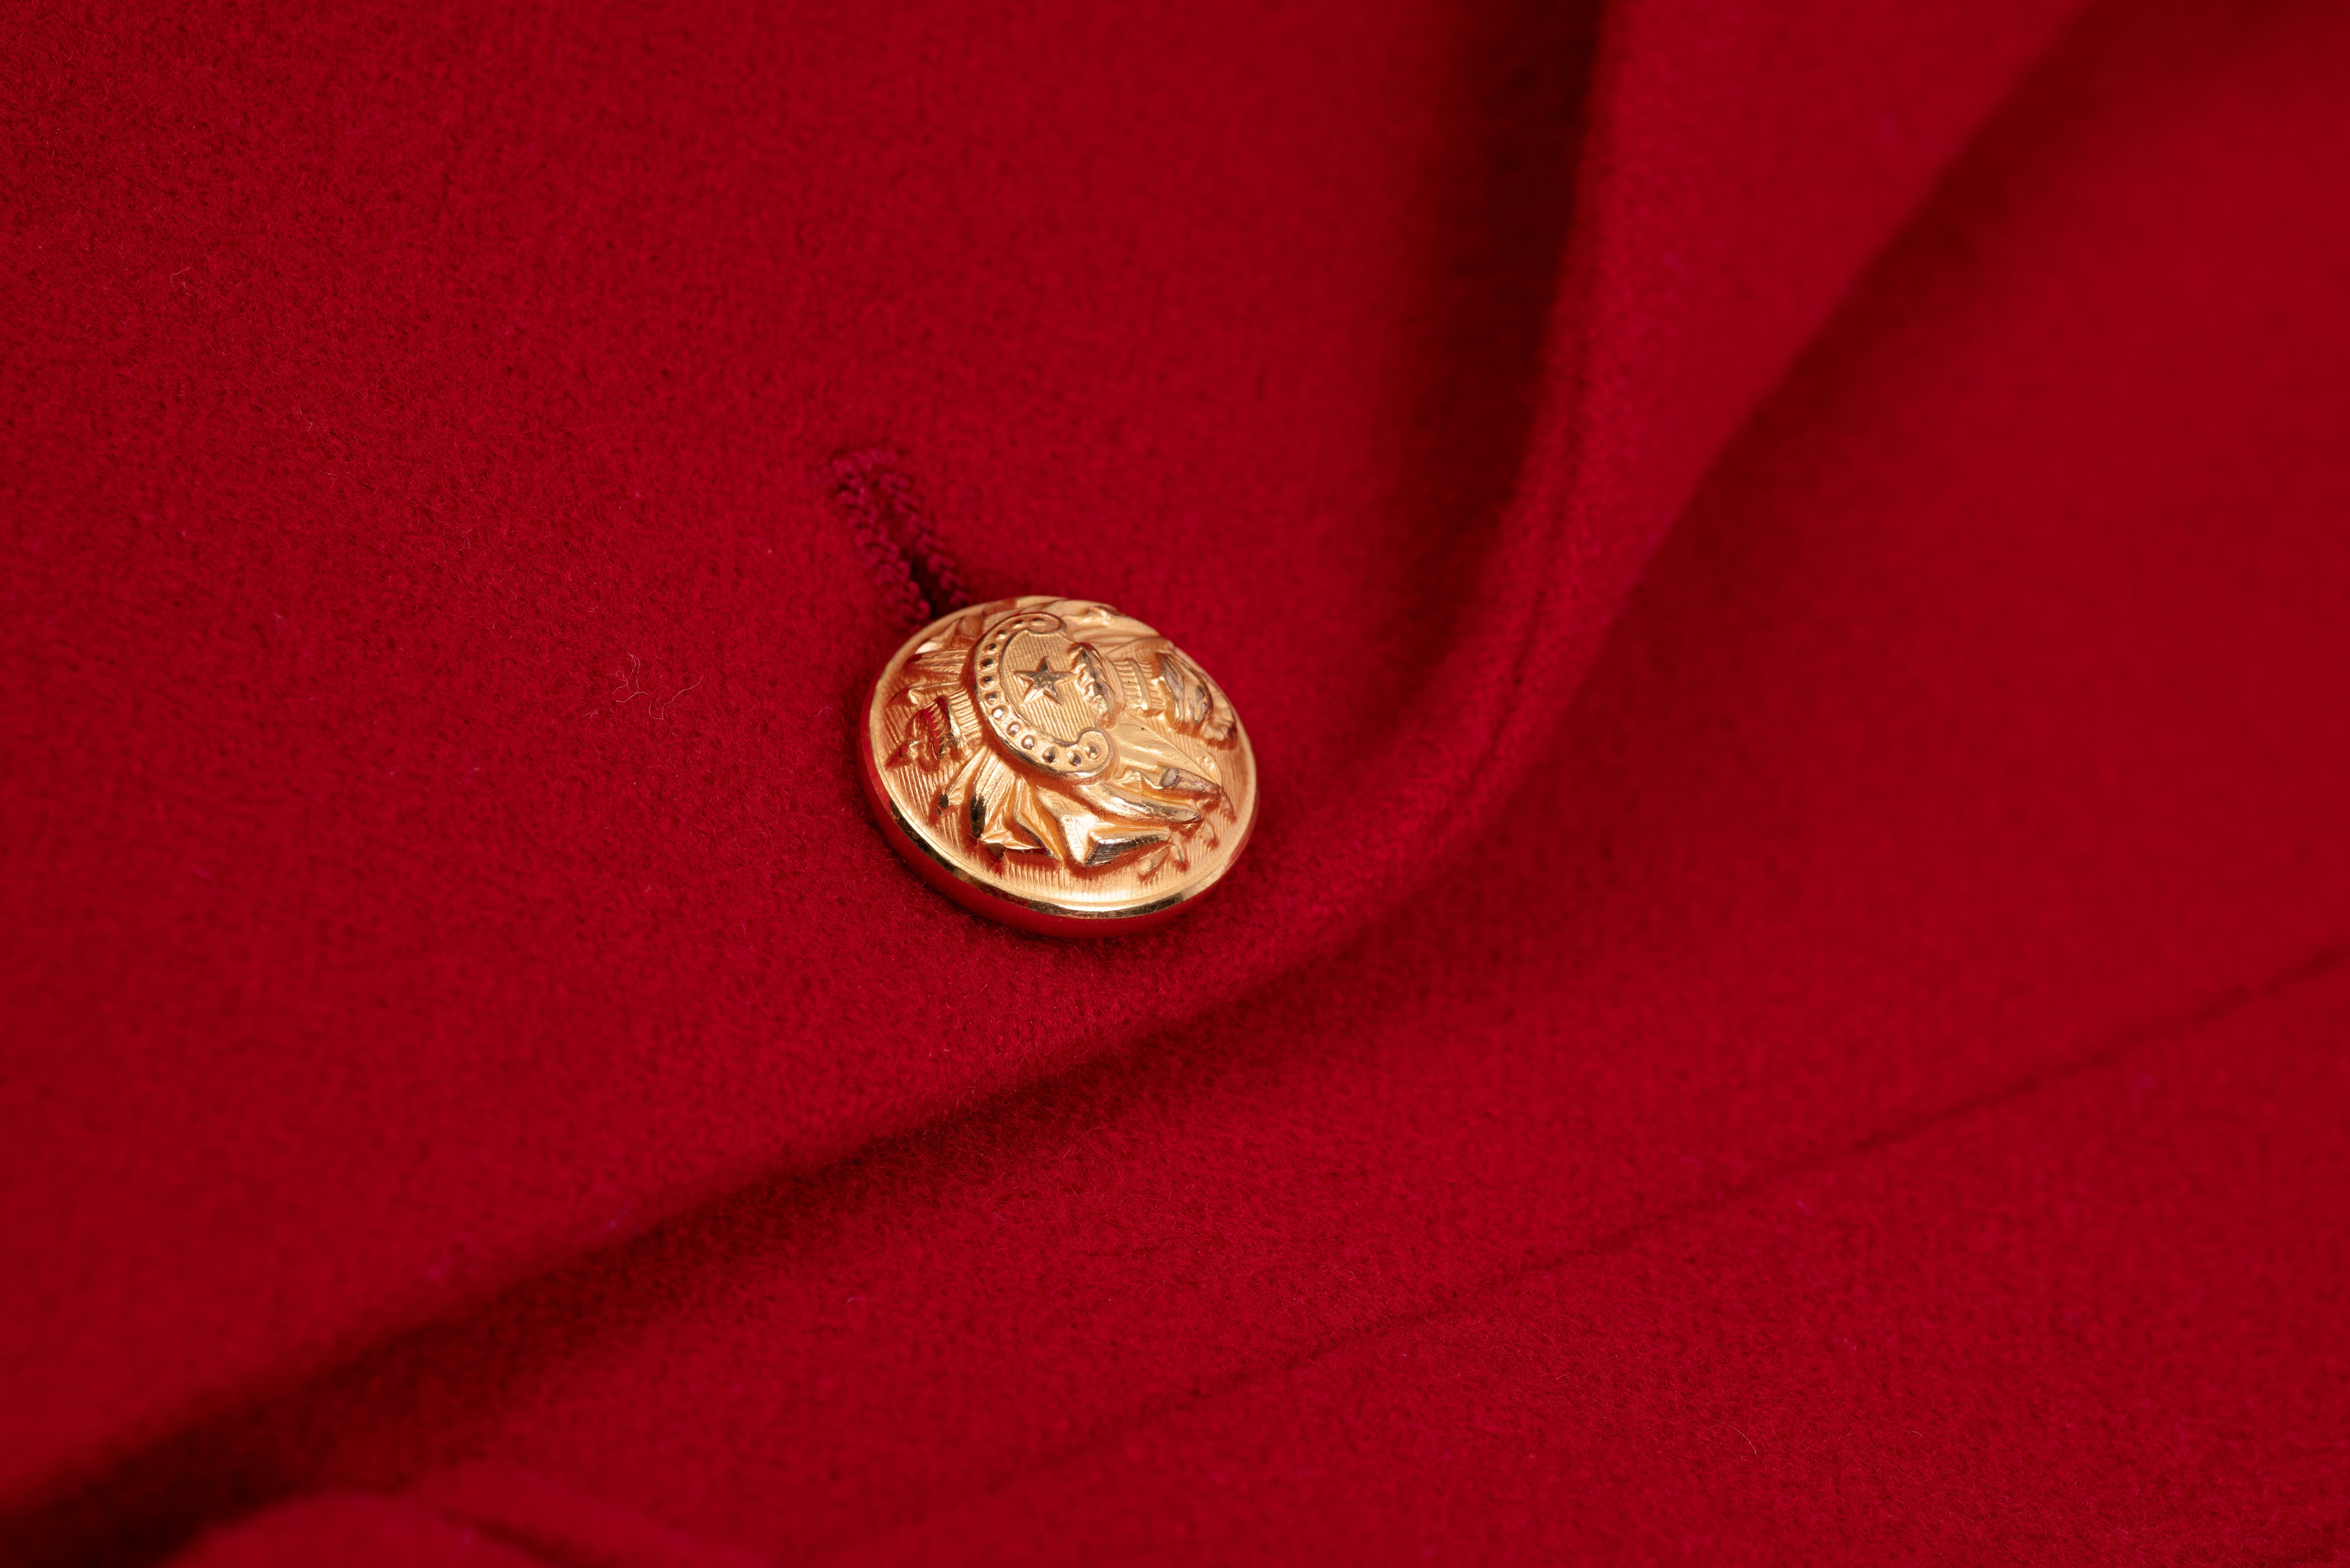 Cashmere Blend Red Wool Double Breasted Blazer With Gold Buttons, S